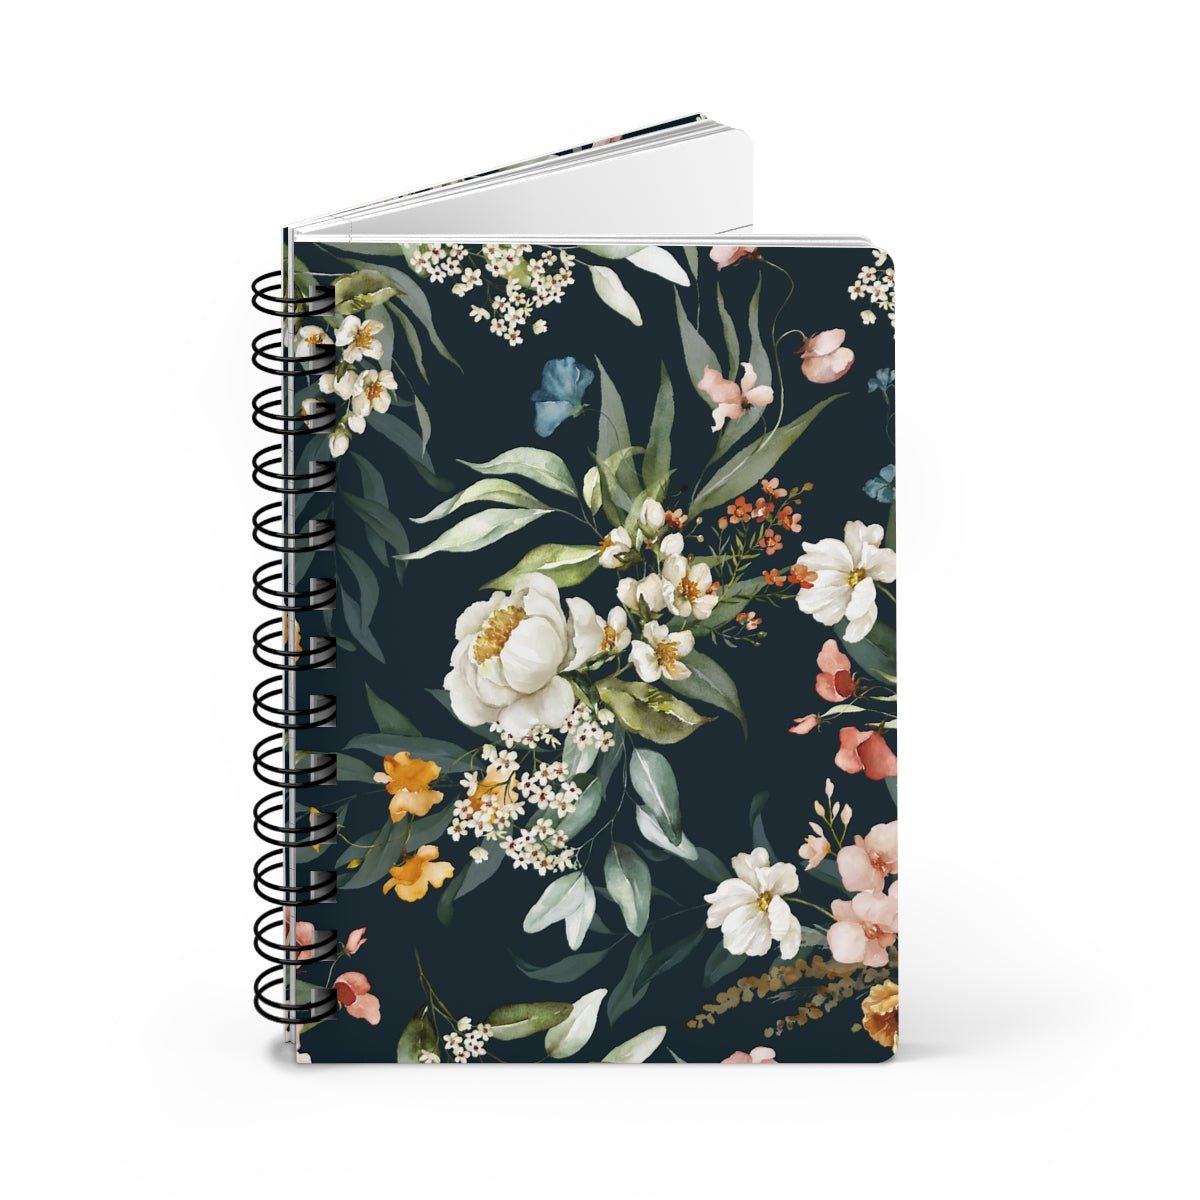 Watercolor Flowers Spiral Bound Journal - Puffin Lime